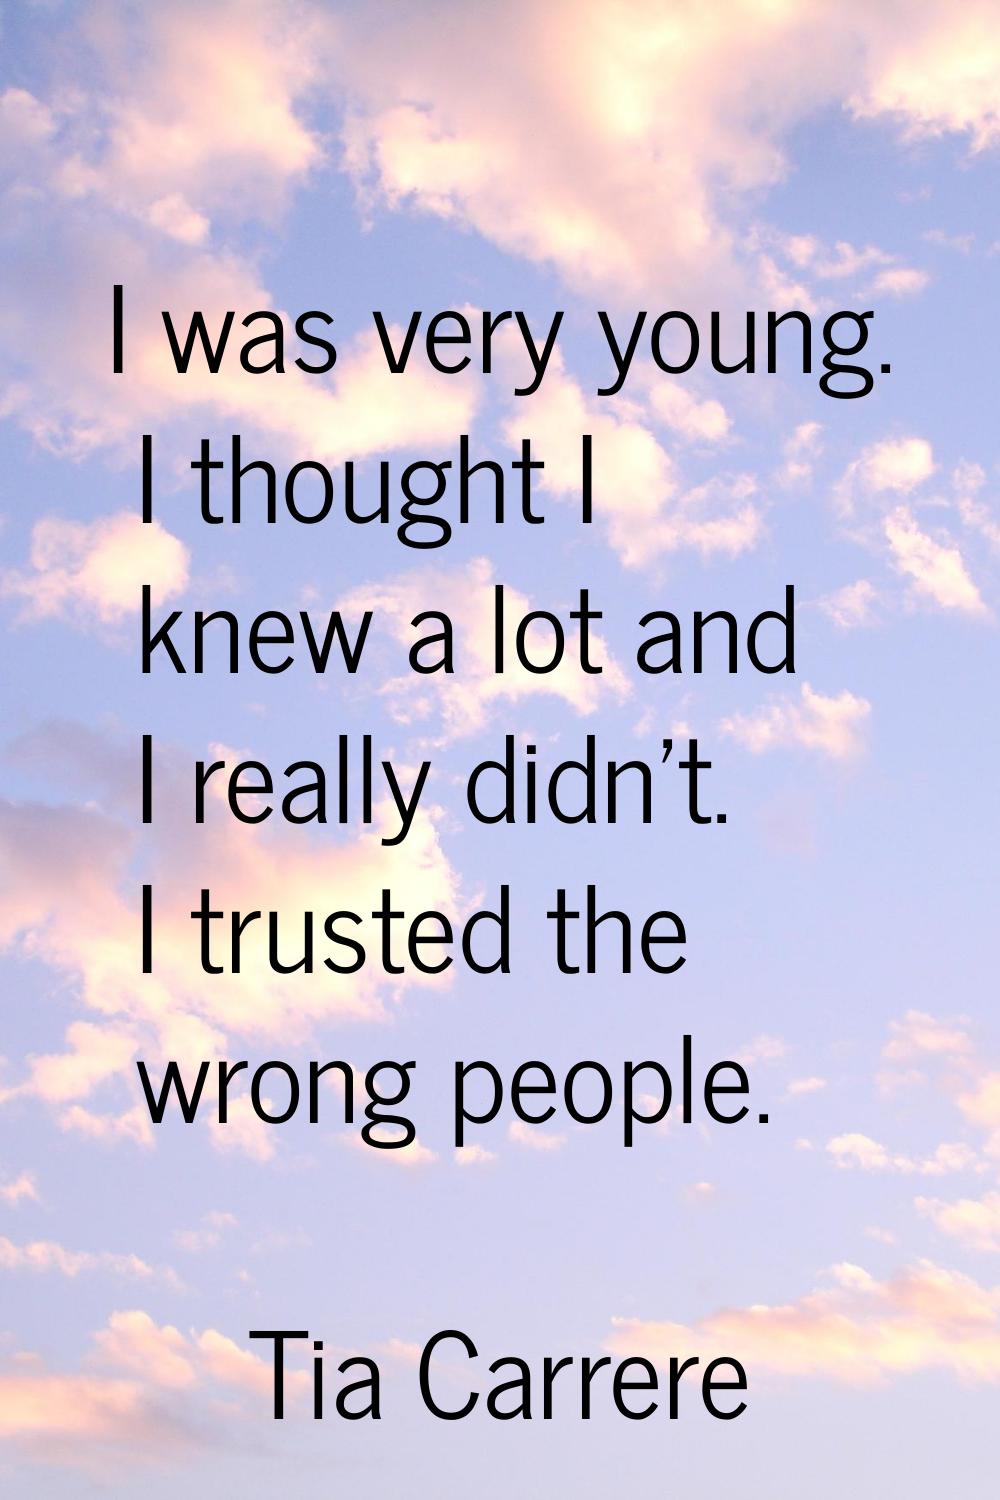 I was very young. I thought I knew a lot and I really didn't. I trusted the wrong people.